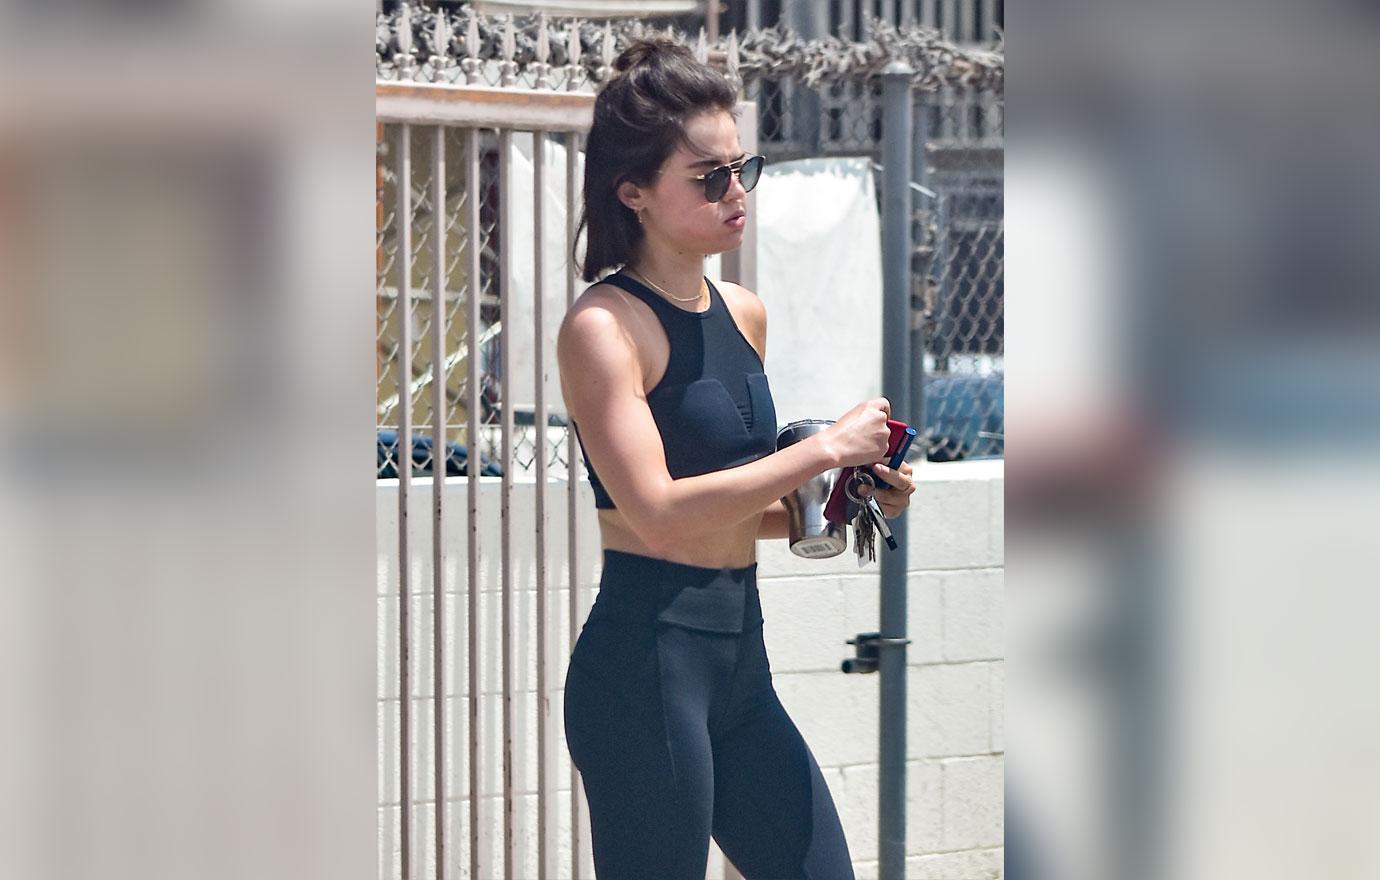 Lucy Hale heads out in a black sports bra and leggings after a